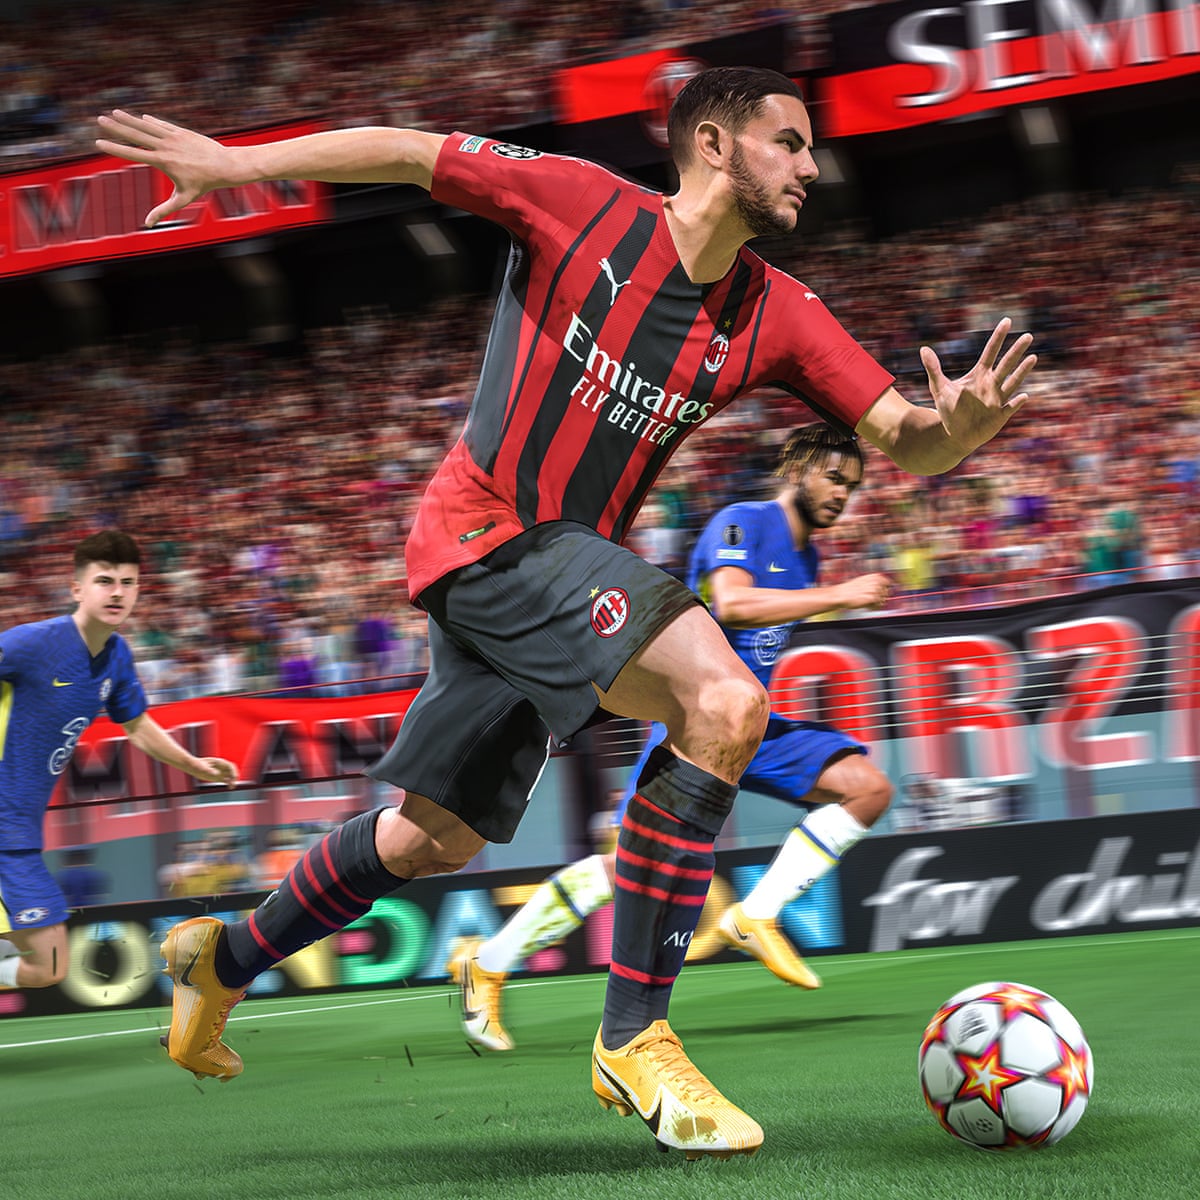 Fifa 22 review – a flamboyant multiplex of total football | Games | The Guardian